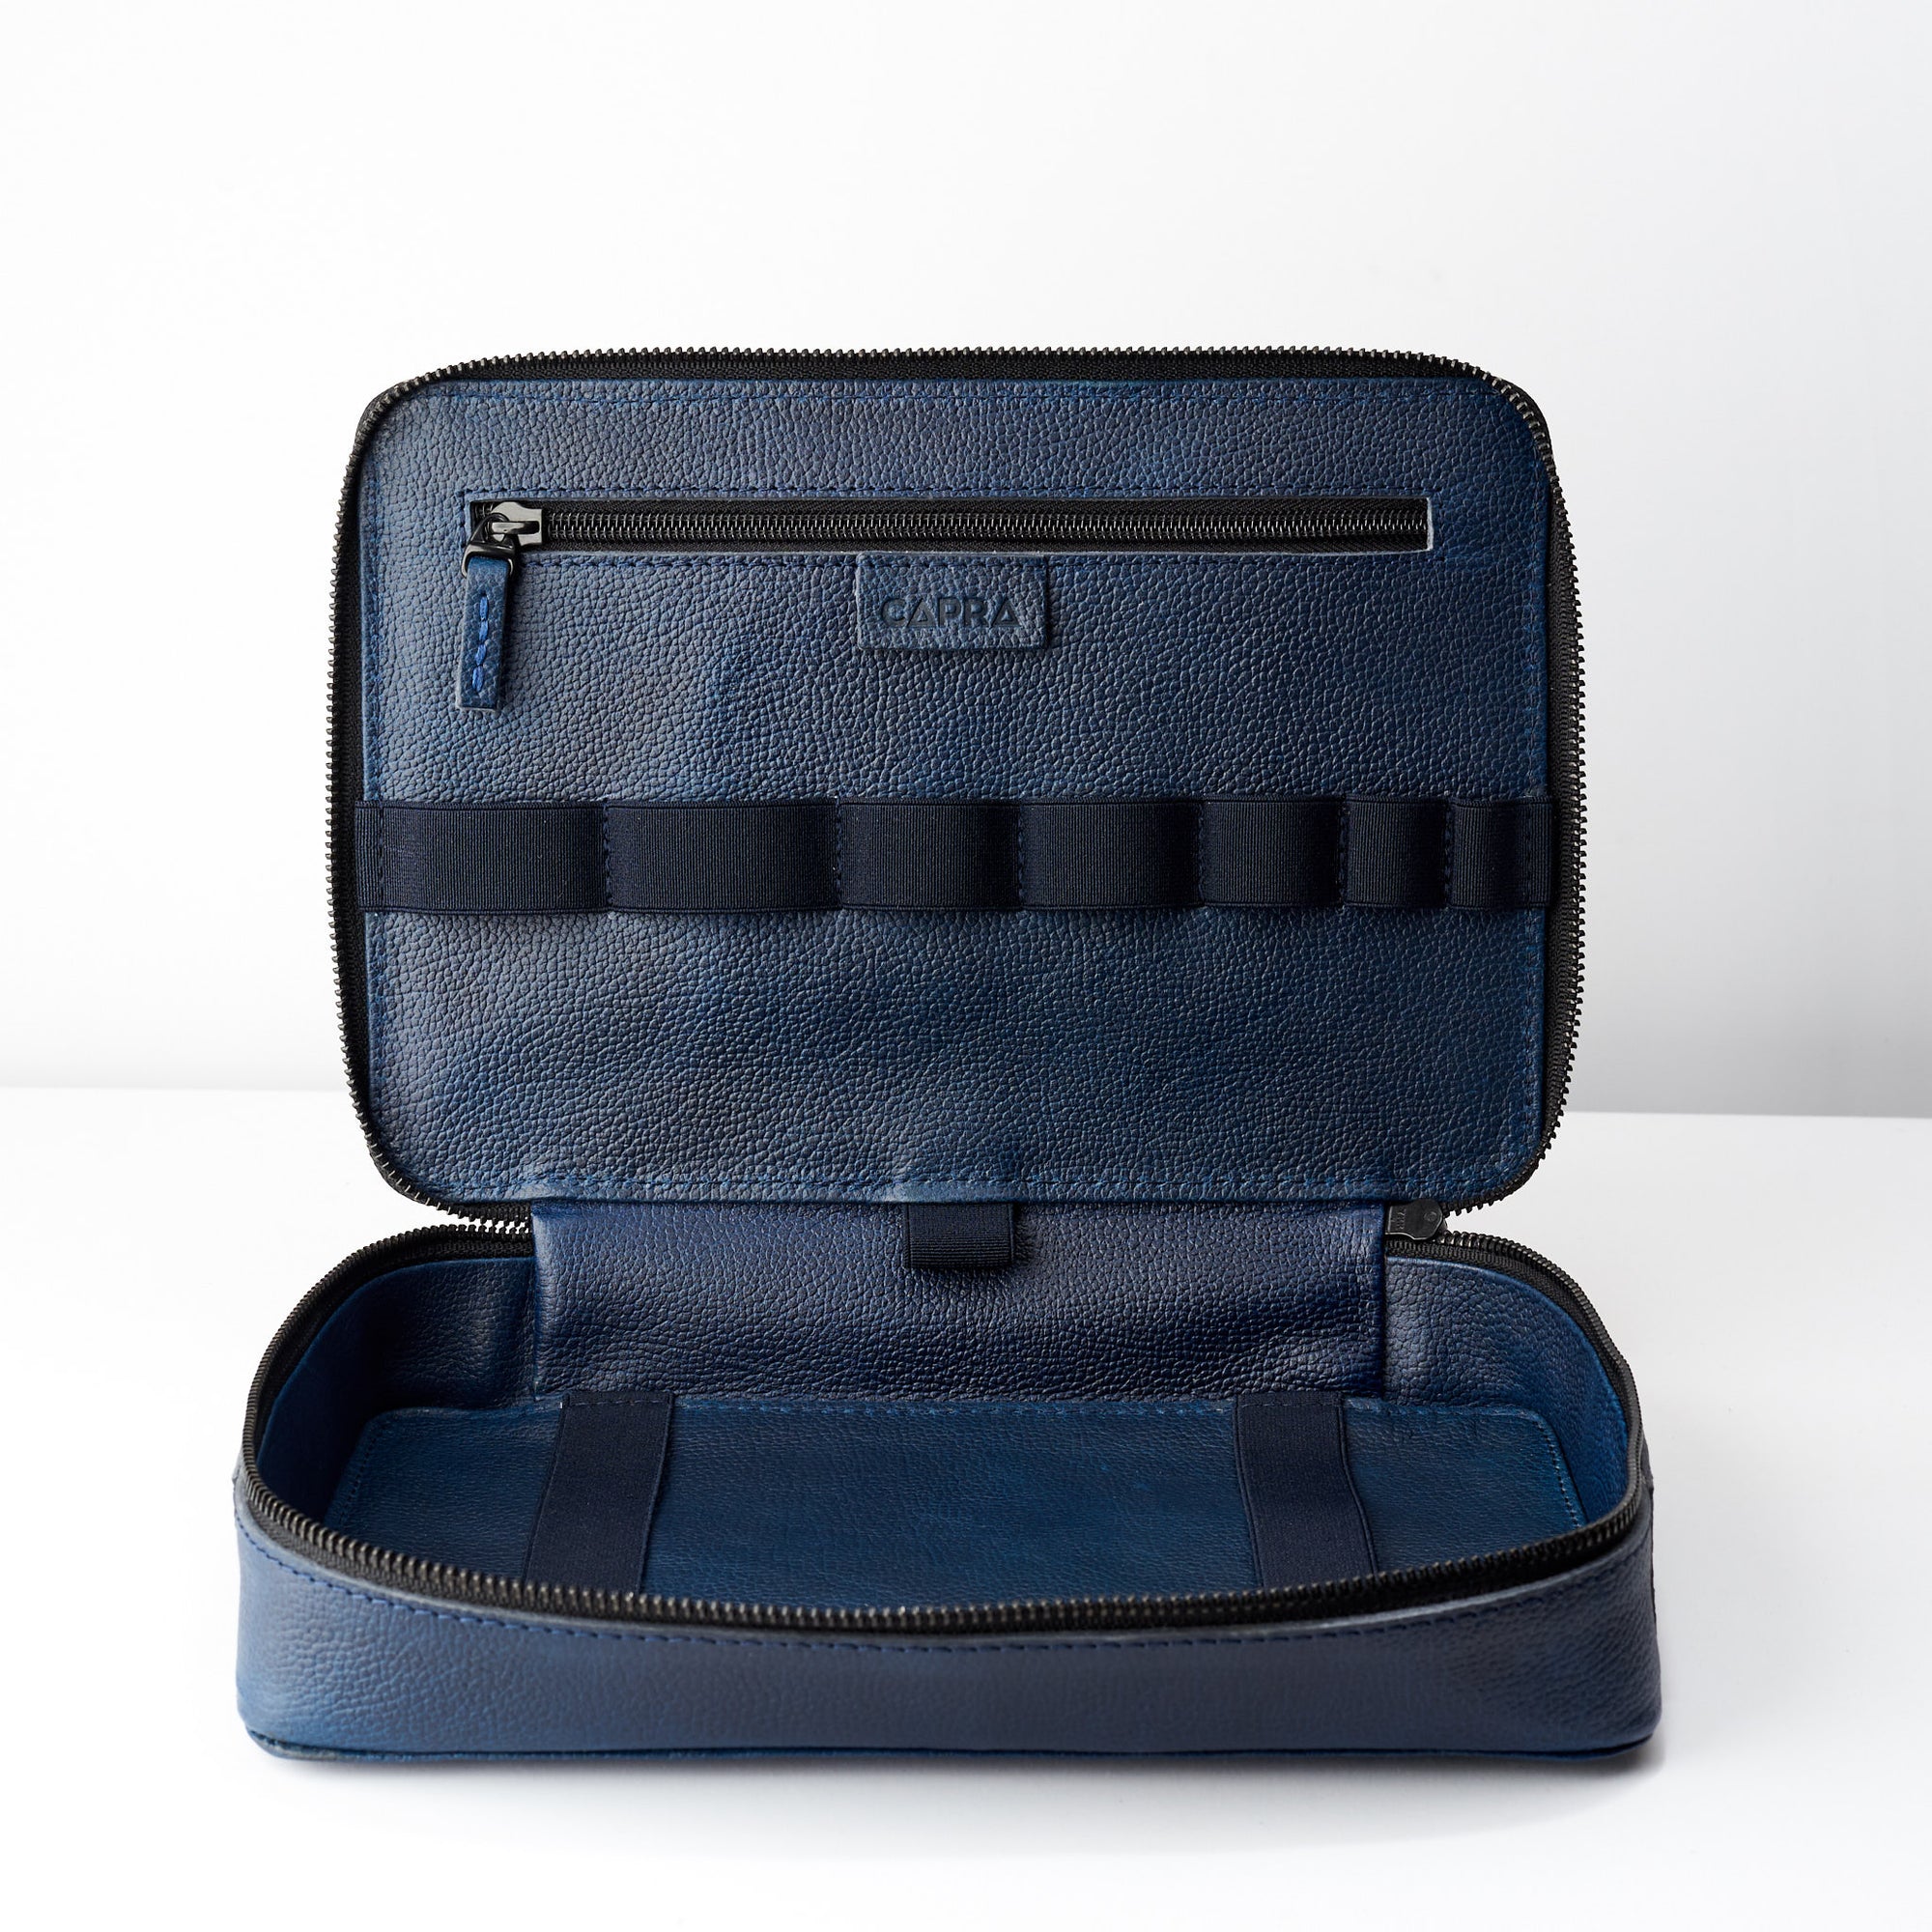 Leather interior. Navy blue tech organizer travel by Capra Leather